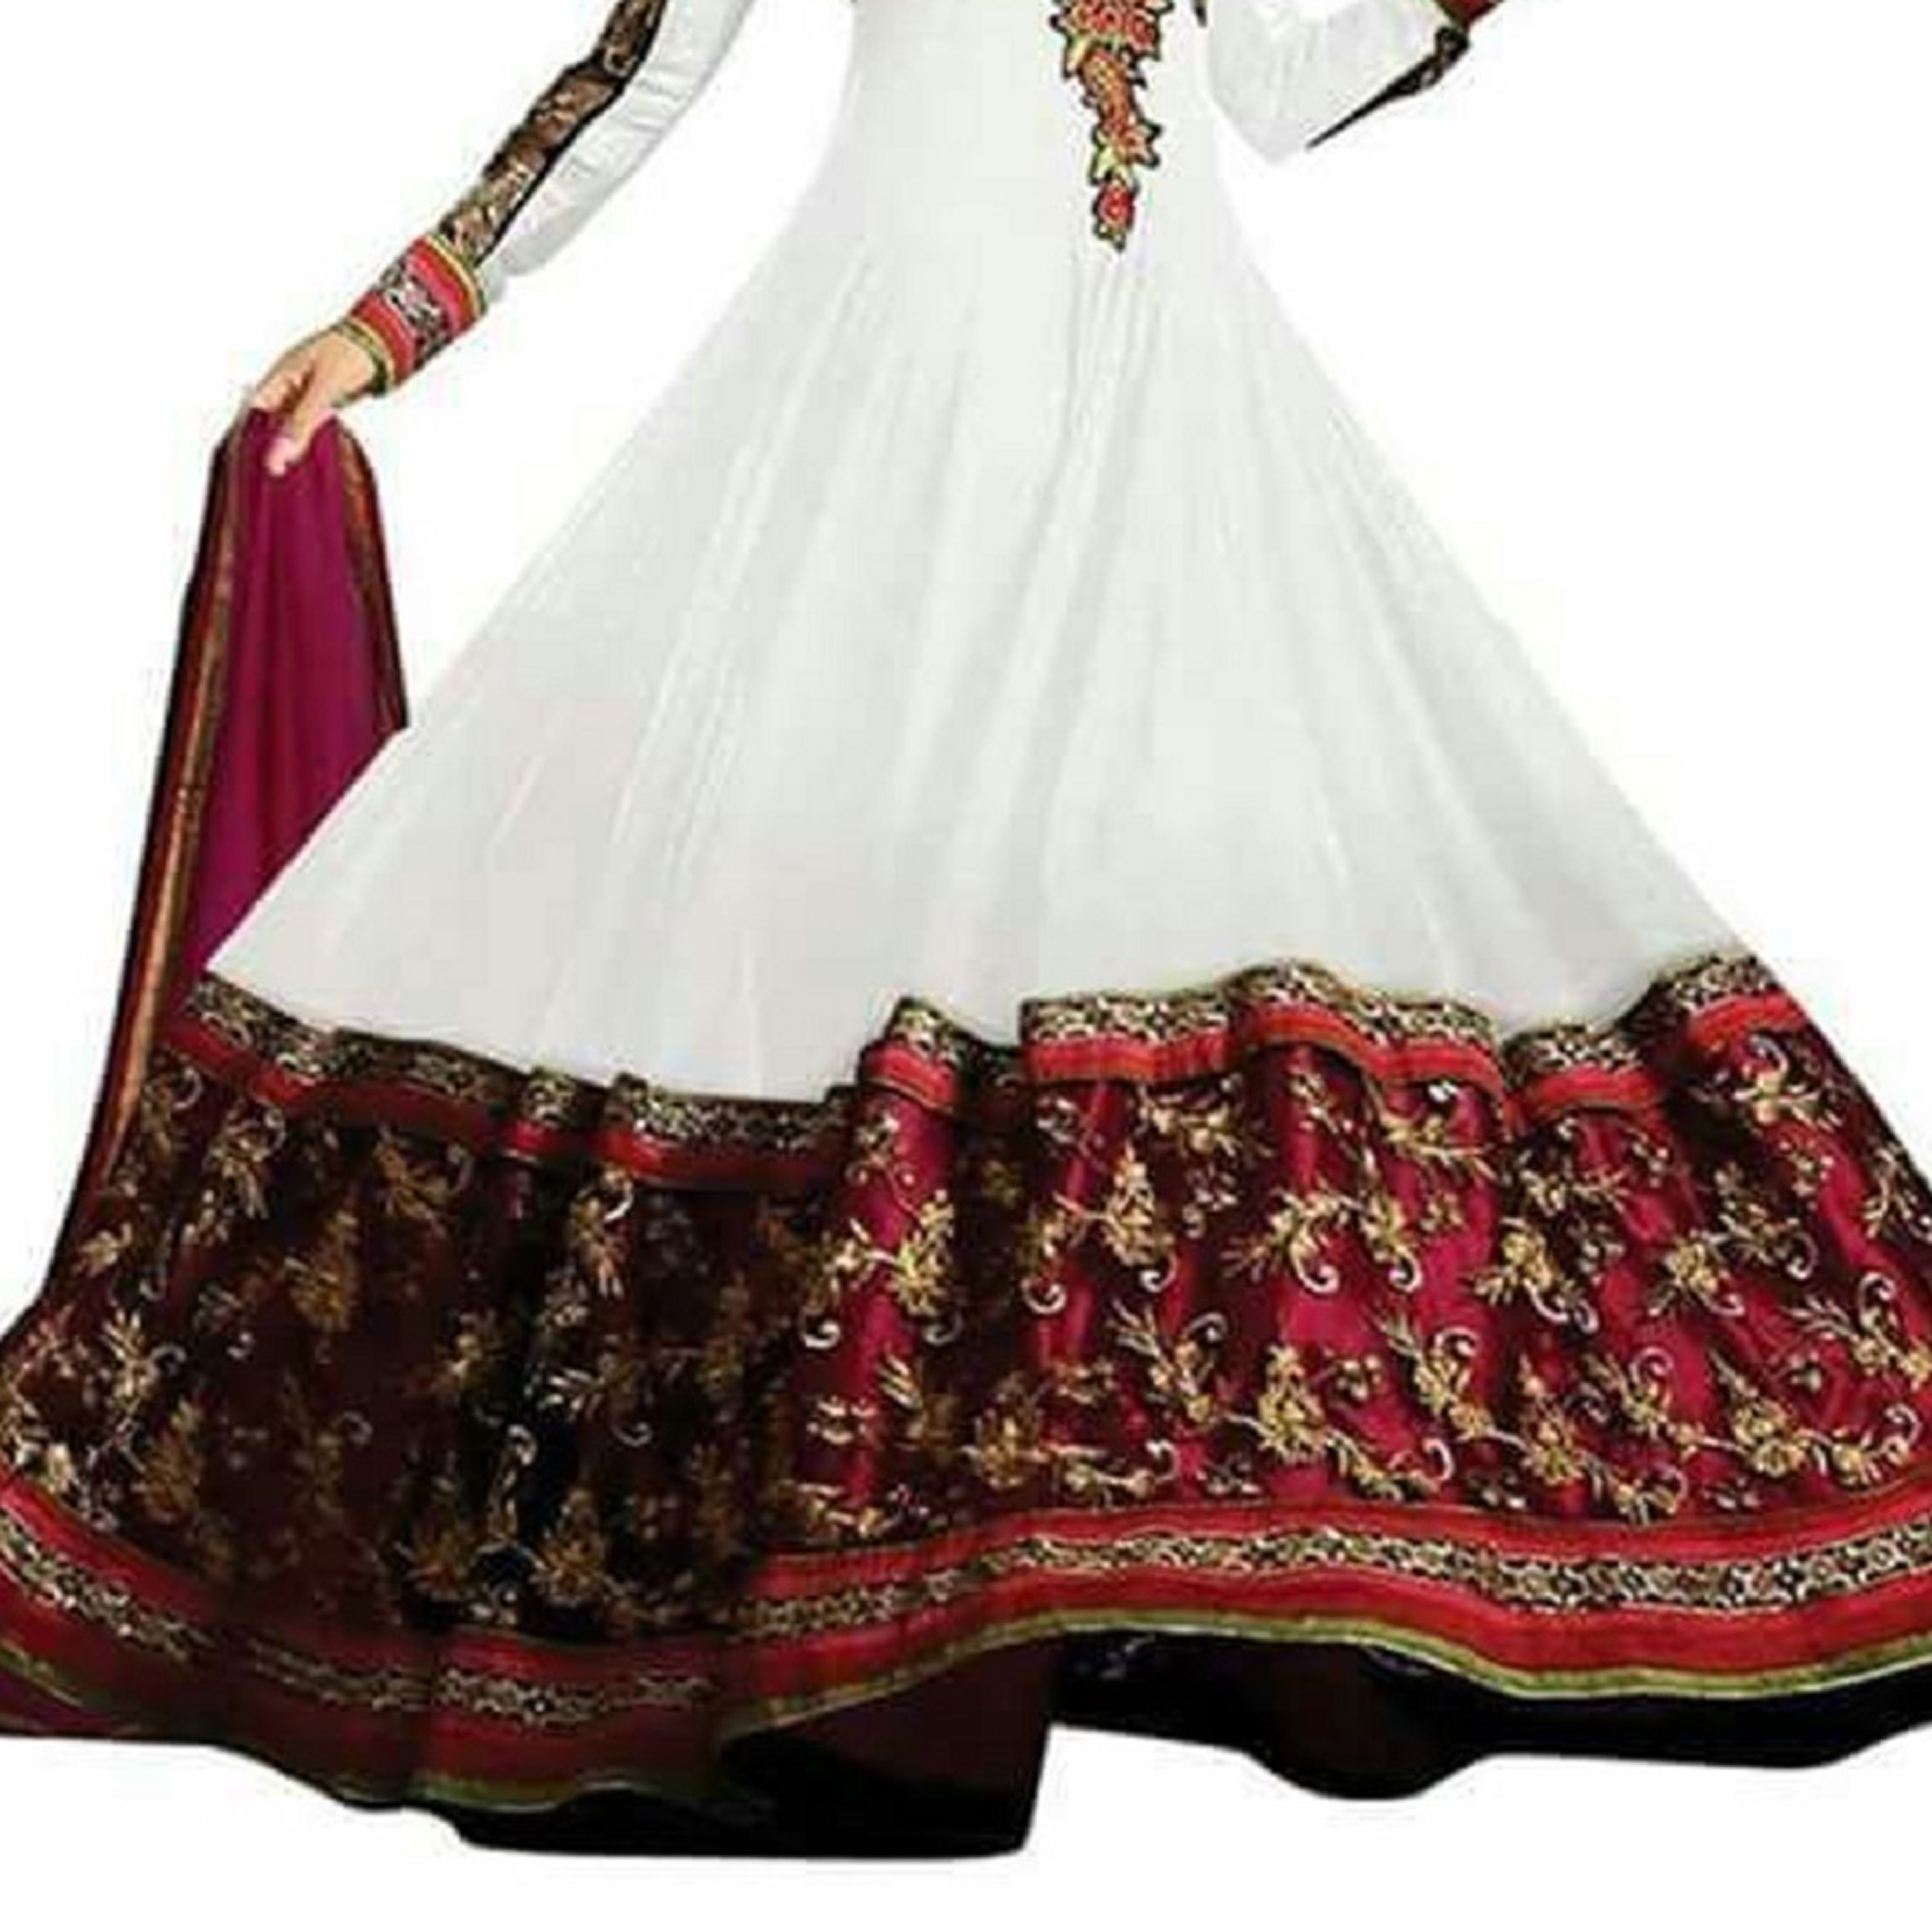 Buy Florence White Georgette Embroidered Semi Stitched Salwar Suit Online ₹809 From Shopclues